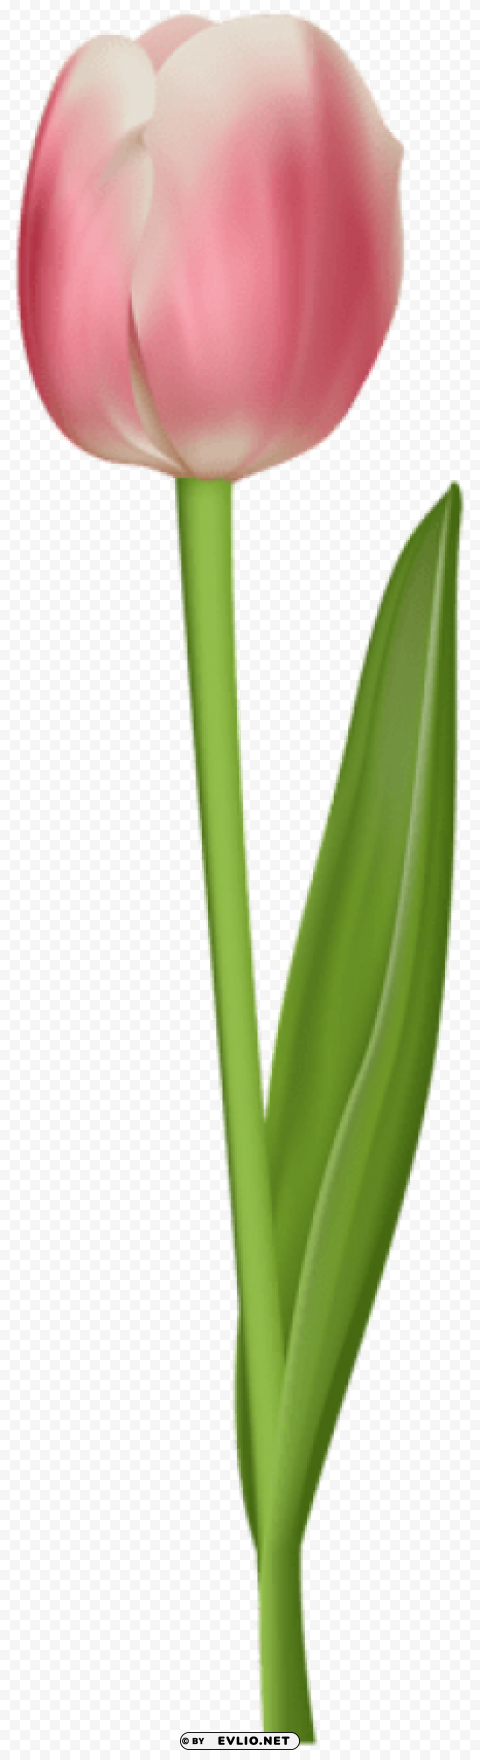 PNG image of tulip Isolated Element in Transparent PNG with a clear background - Image ID 64b21bdf